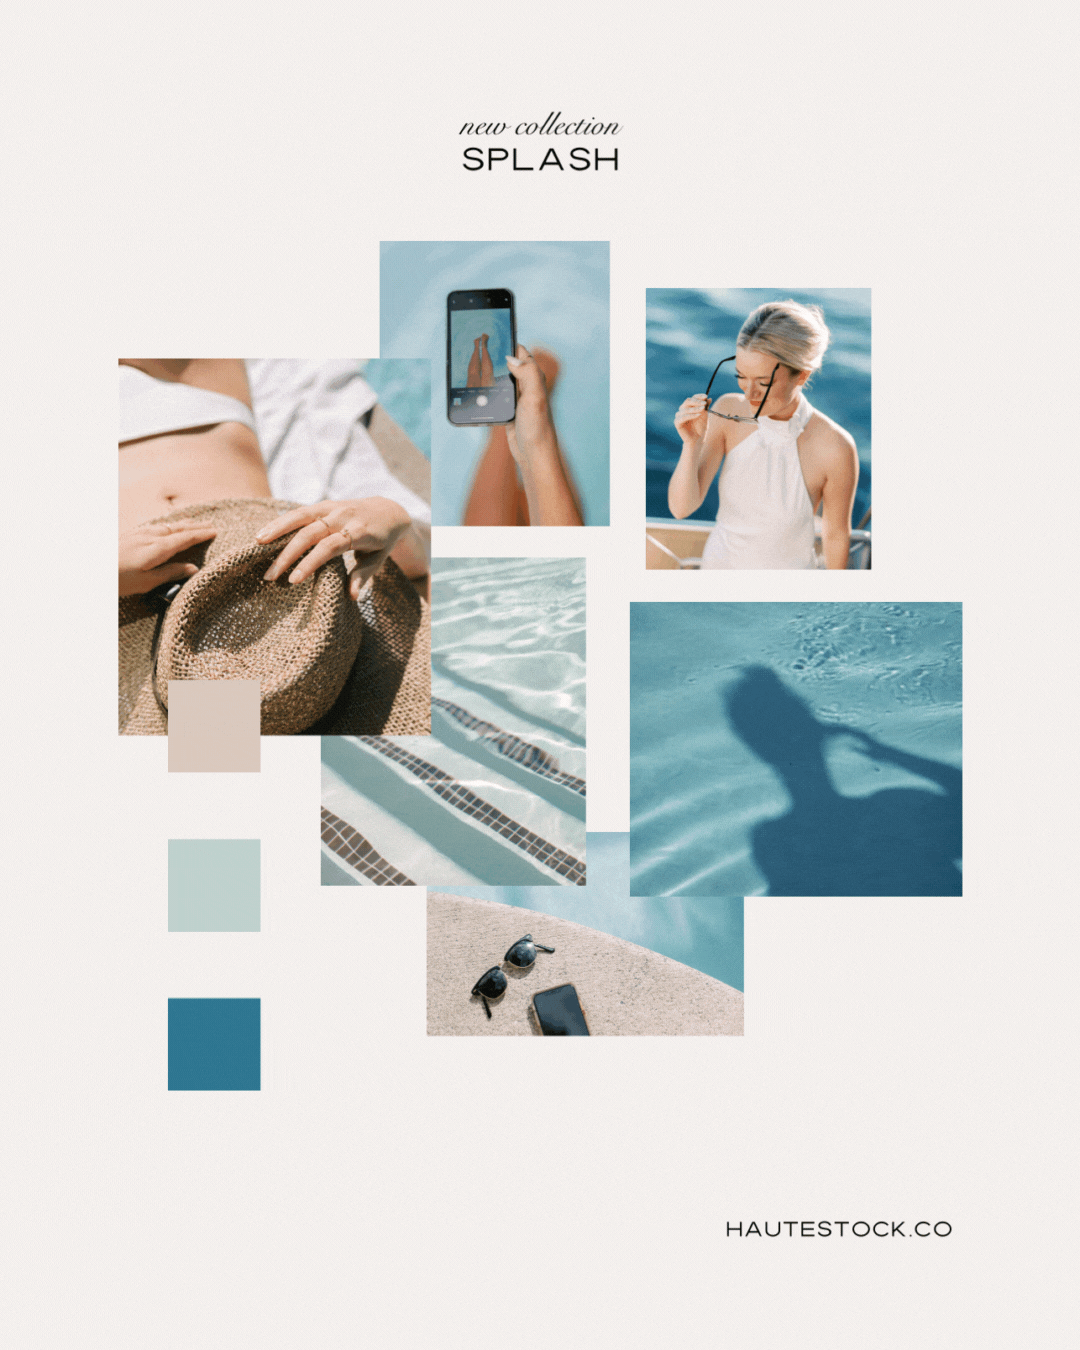 Mood board for Splash collection features stock photos and videos of relaxing day by the pool, in cool blue and neutral color palette.